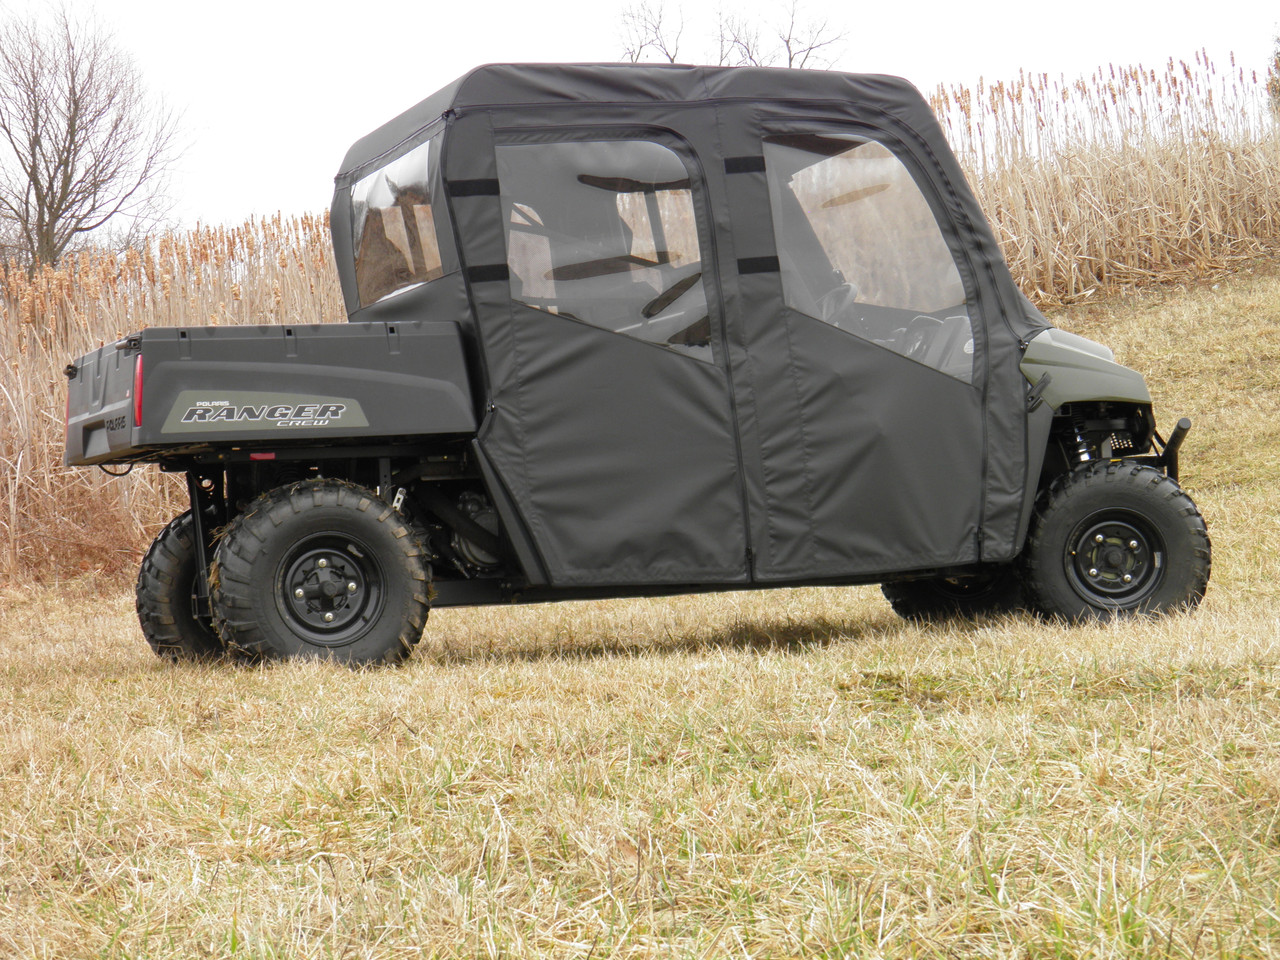 3 Star side x side Polaris Ranger Mid-Size Crew 500/570 doors and rear window side view